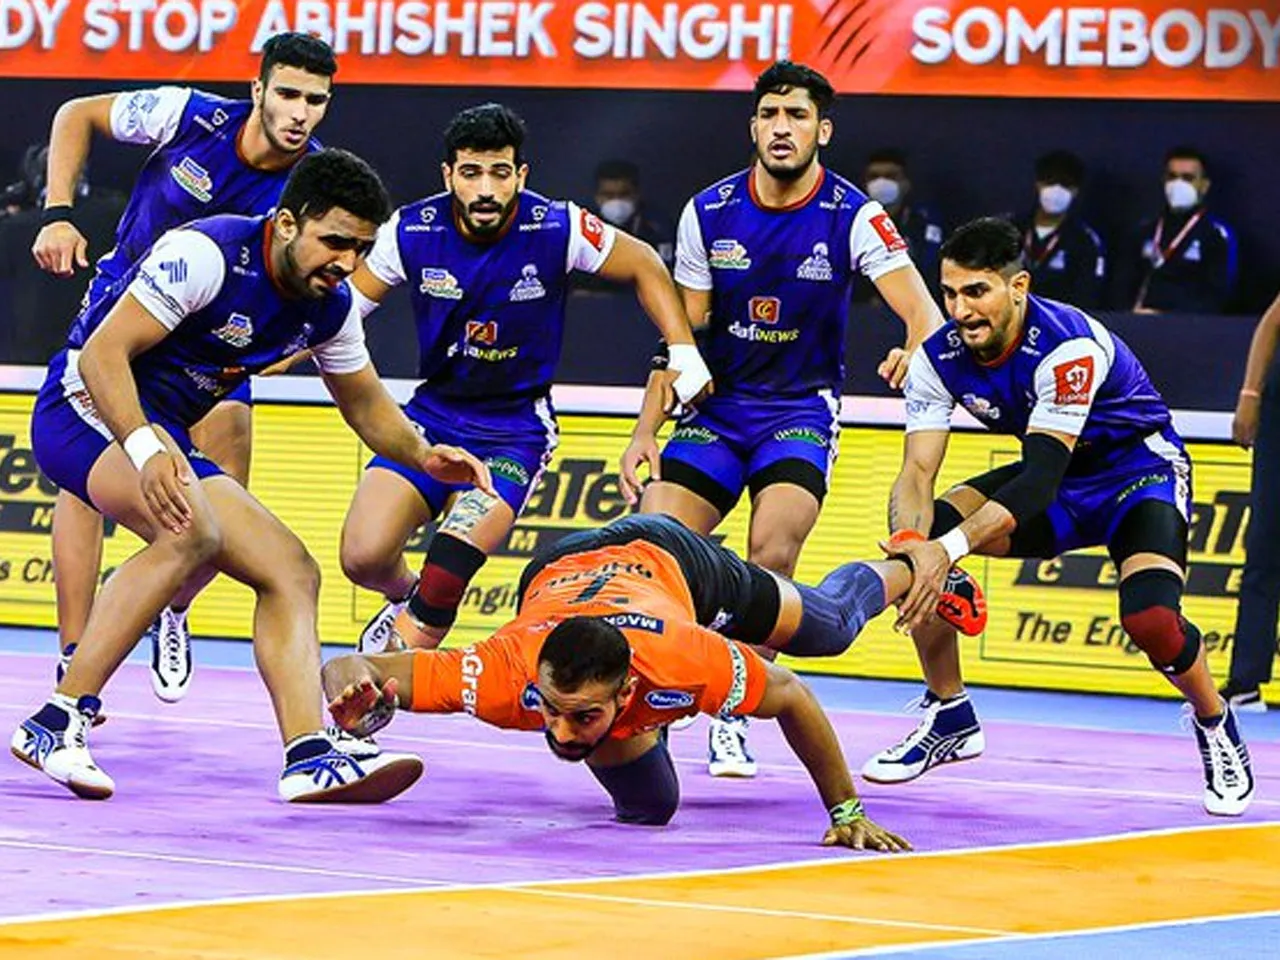 Do you know how the performance of Haryana Steelers in Pro Kabaddi League?